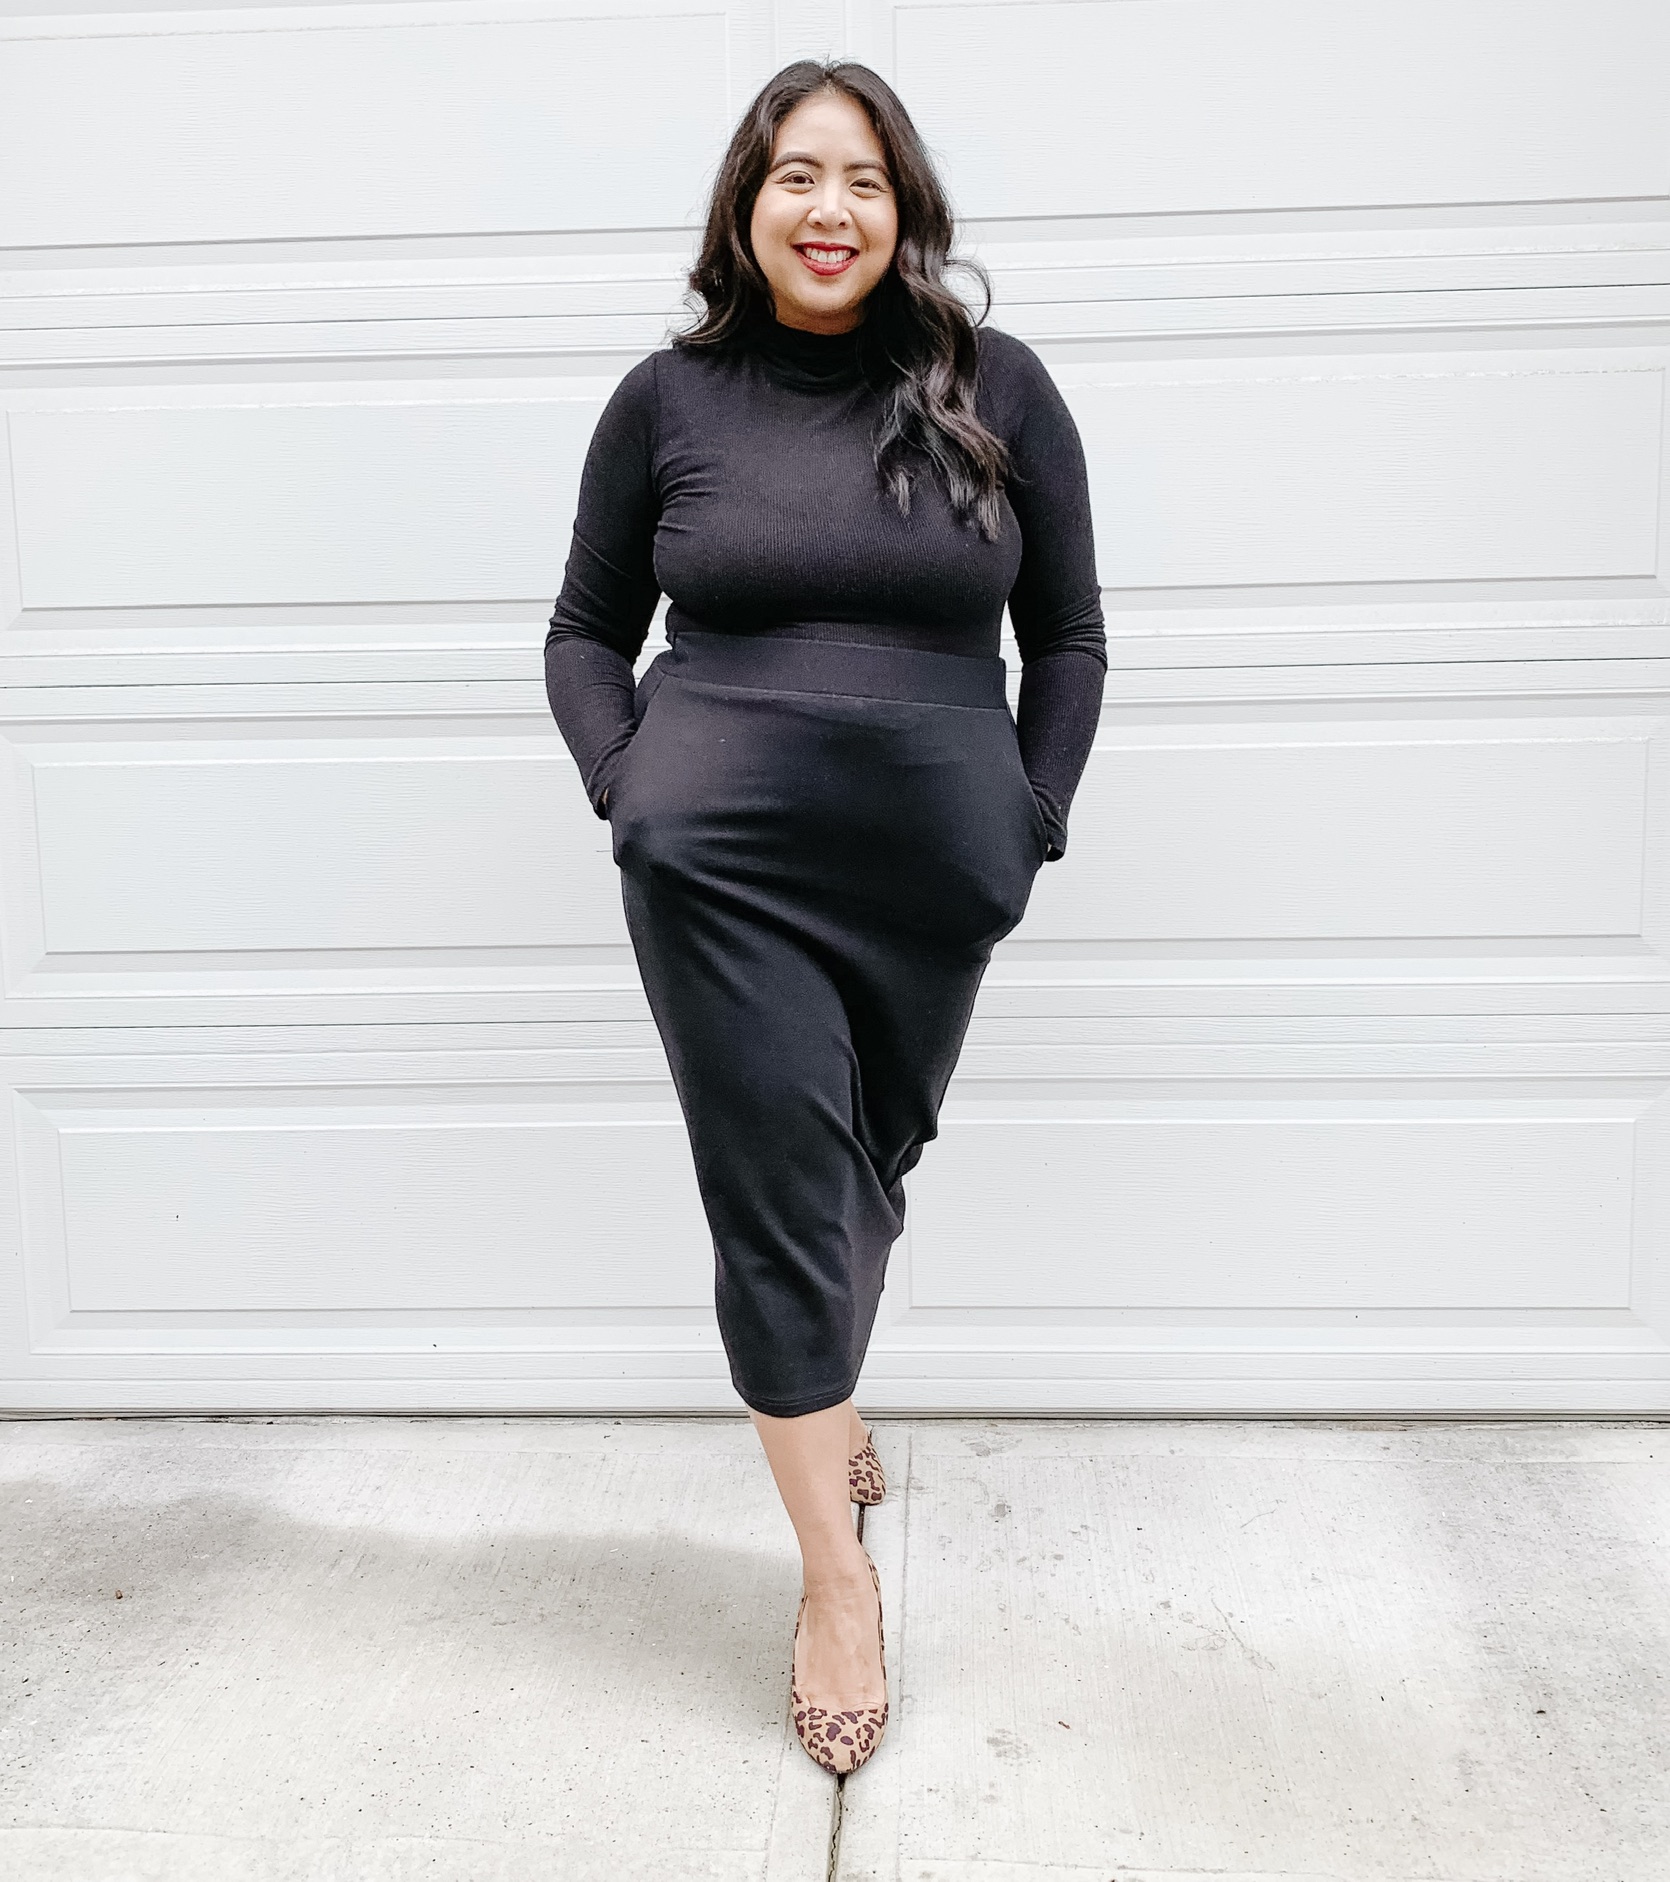 3 ways to wear a pencil skirt | Transitioning your wardrobe for fall | Fashion tips | Style tips | How to wear a black pencil skirt | How to wear a black pencil skirt for fall | How to wear a black pencil skirt casual | Black Pencil skirt fashion | Pencil Skirt | How to wear a Pencil Skirt